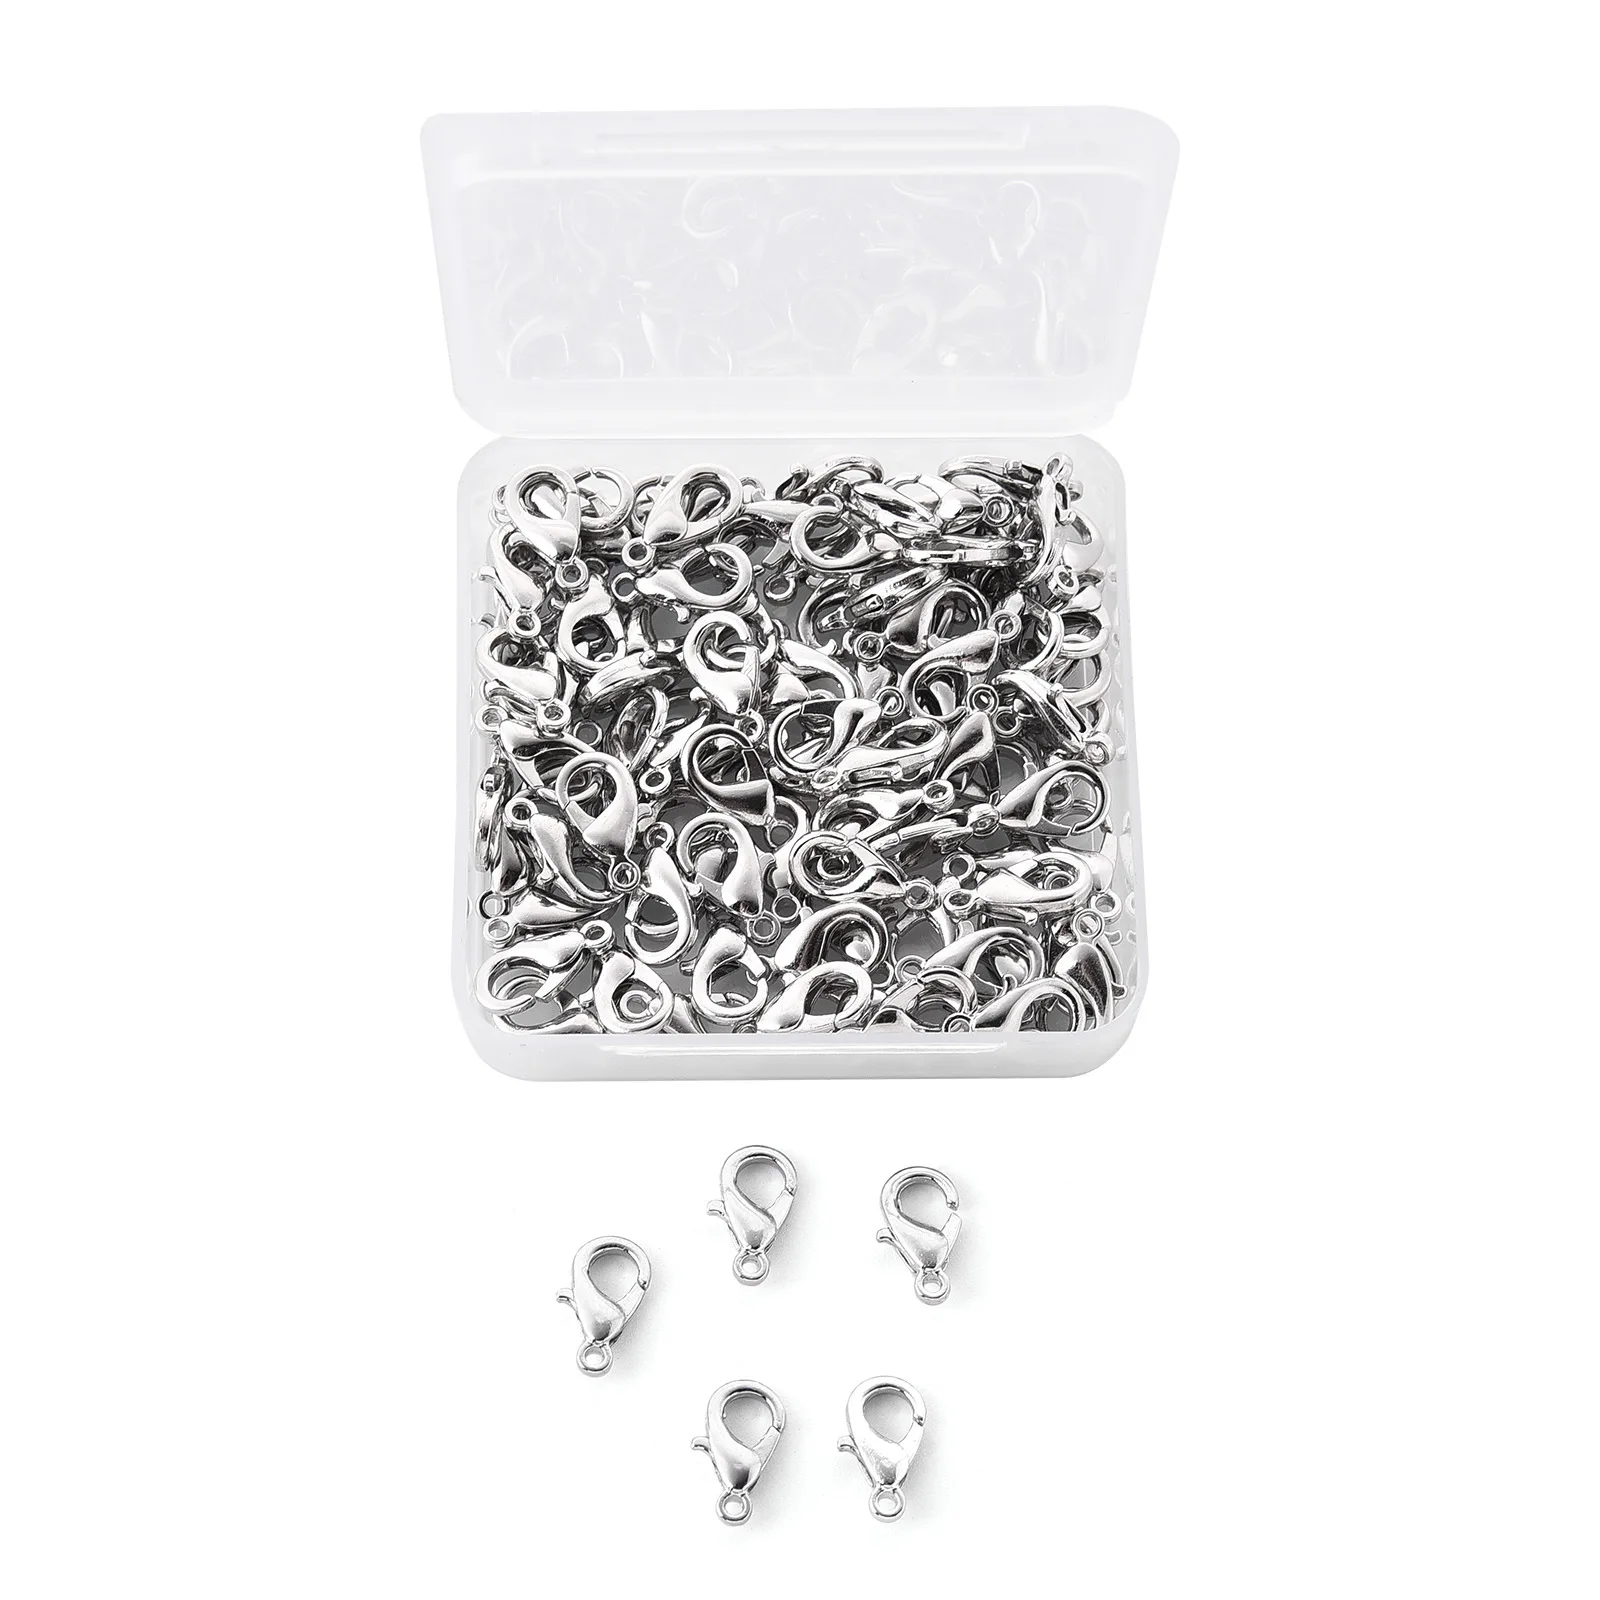 

Hobbyworker 12mm Hot Selling 100Pcs/Box With Alloy Lobster Clasps Set Charms for DIY Jewelry Making Accessories J0897, Picture